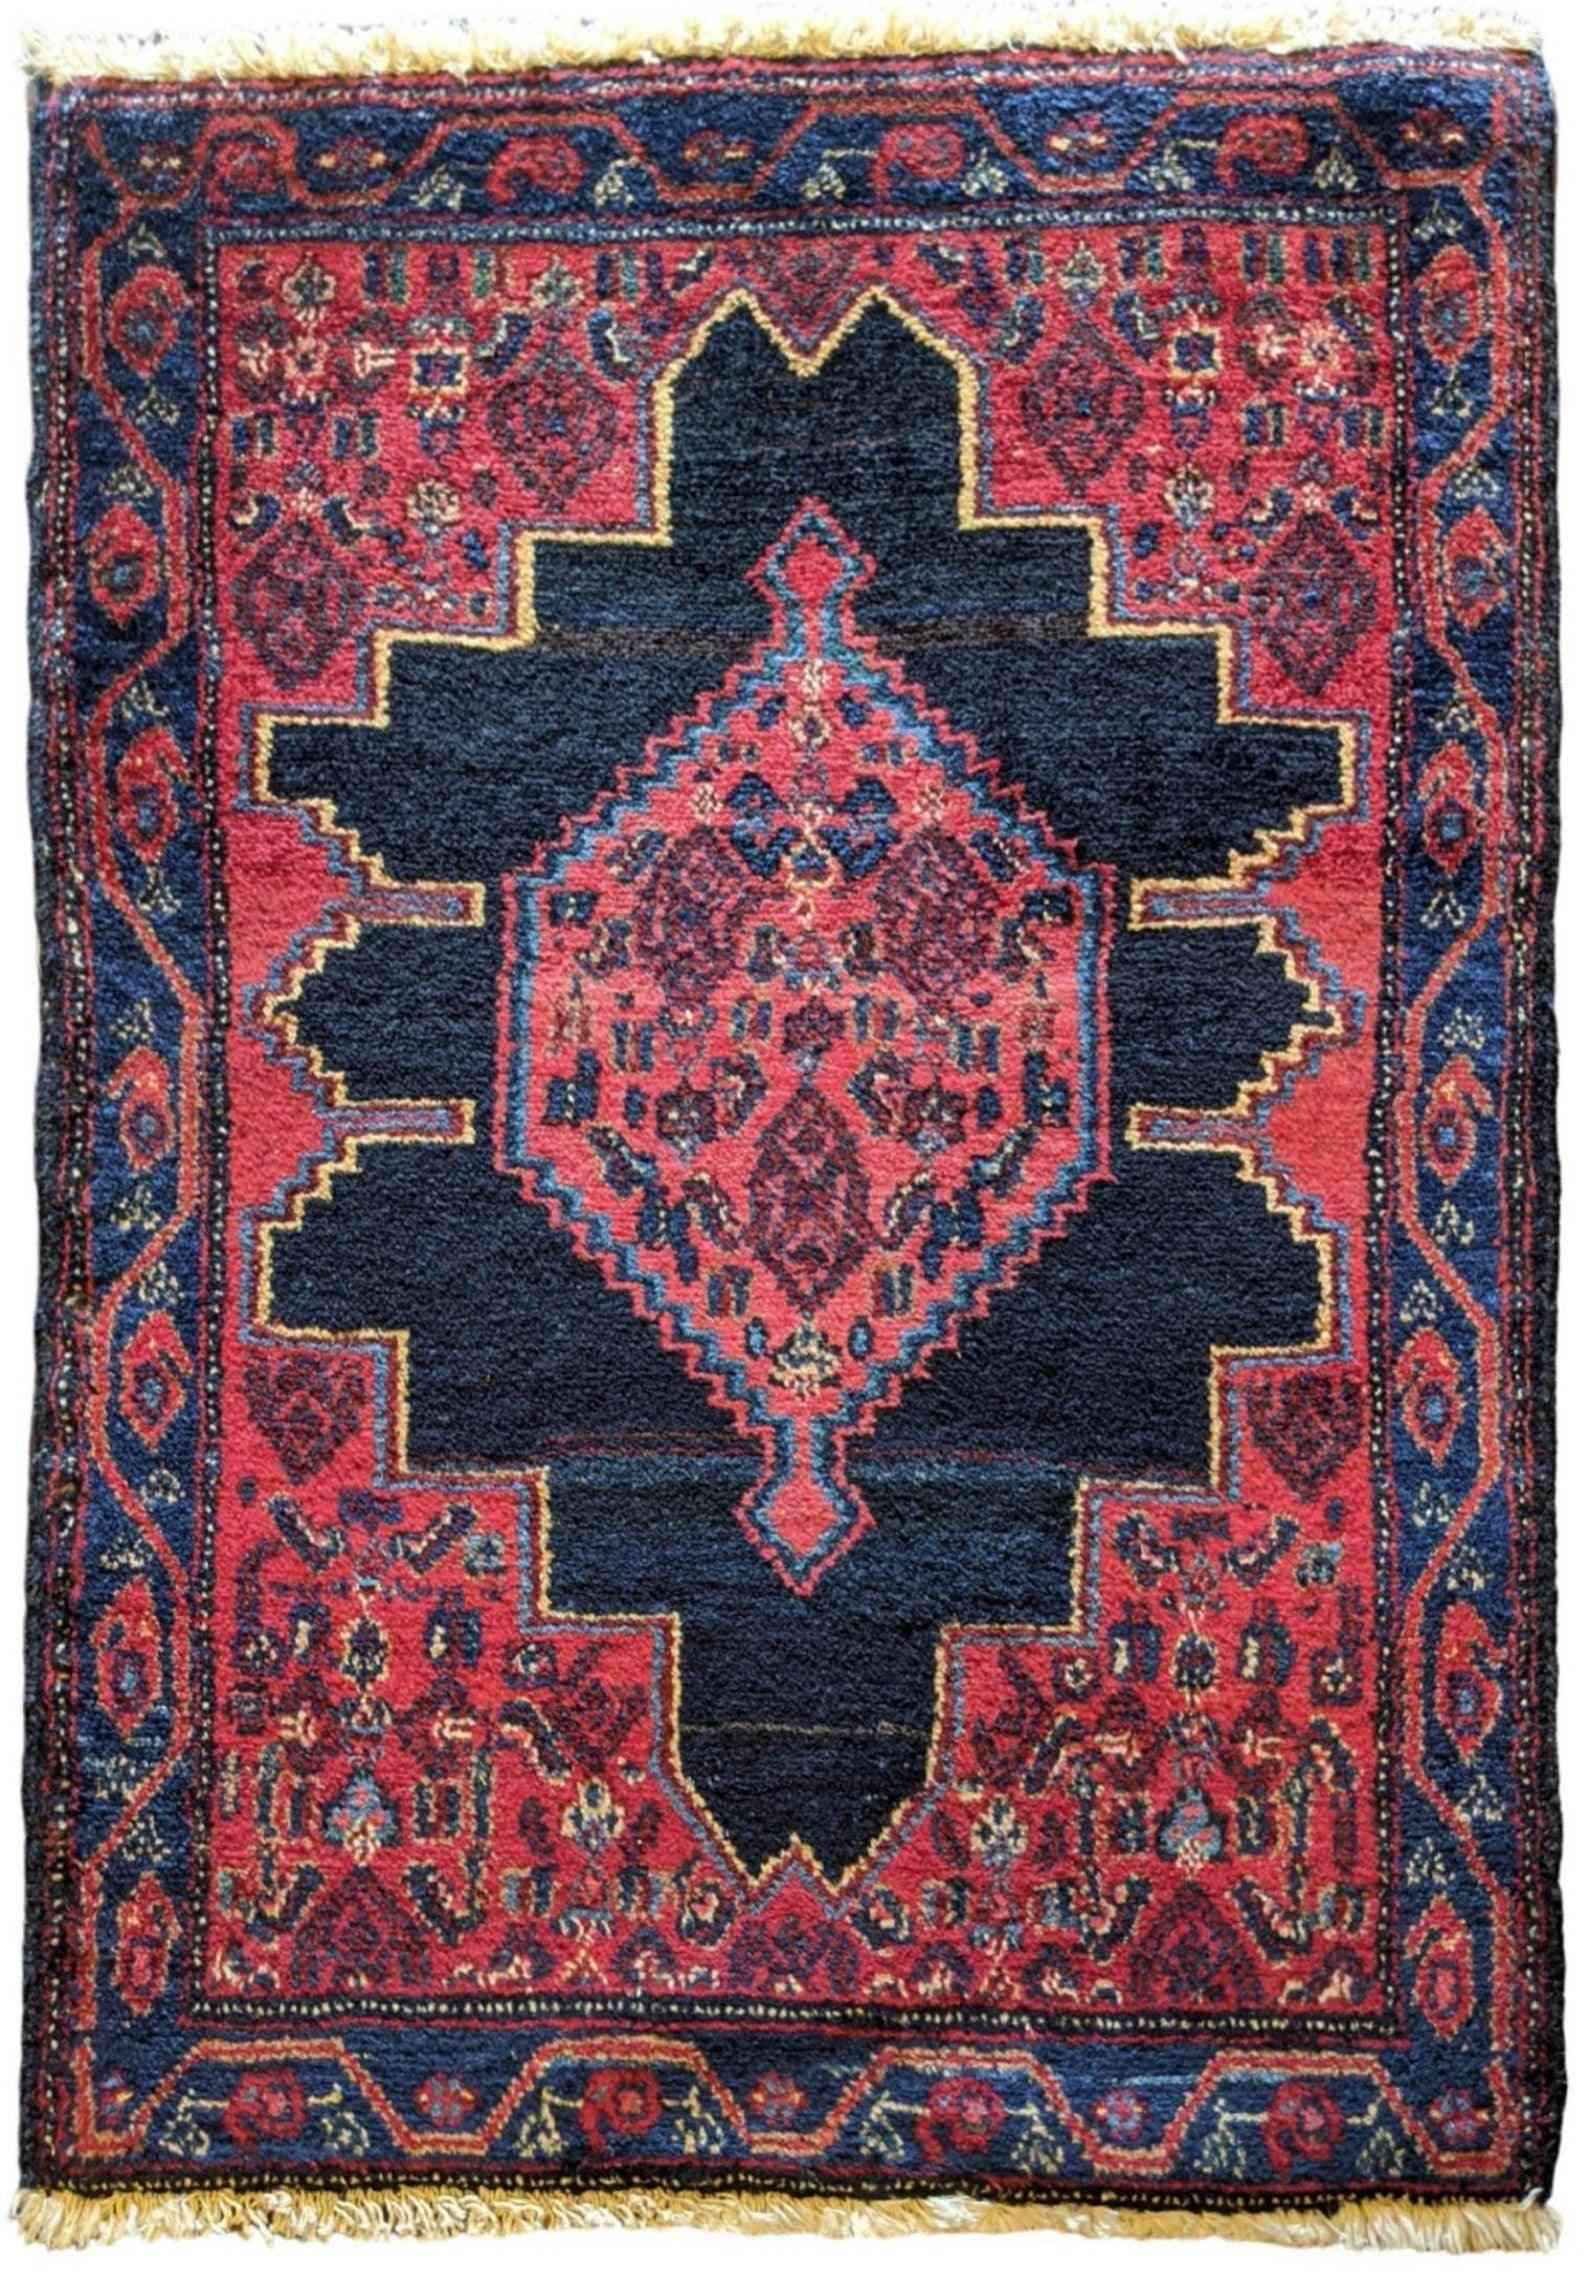 82 x 64 cm Persian Senneh Modern Red Small Rug - Rugmaster